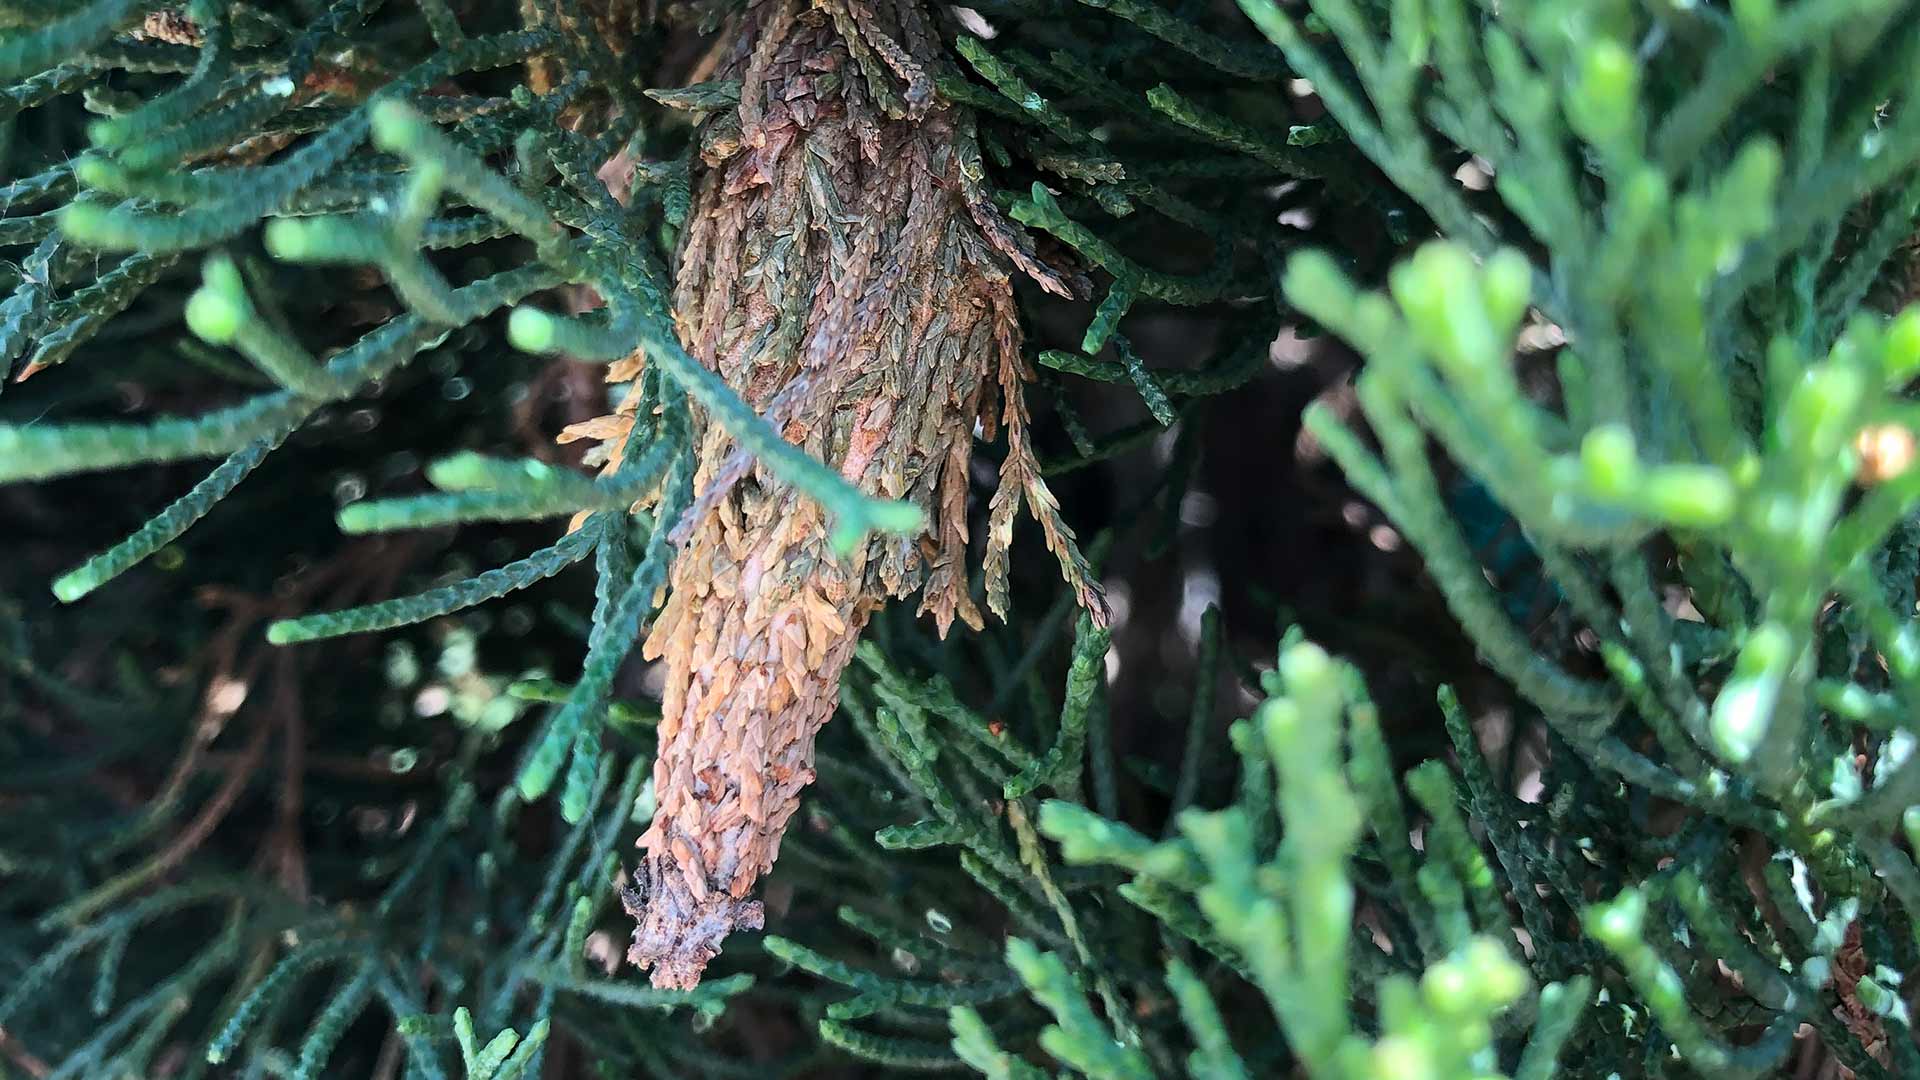 Bagworm spotted at a property in Plano, TX.